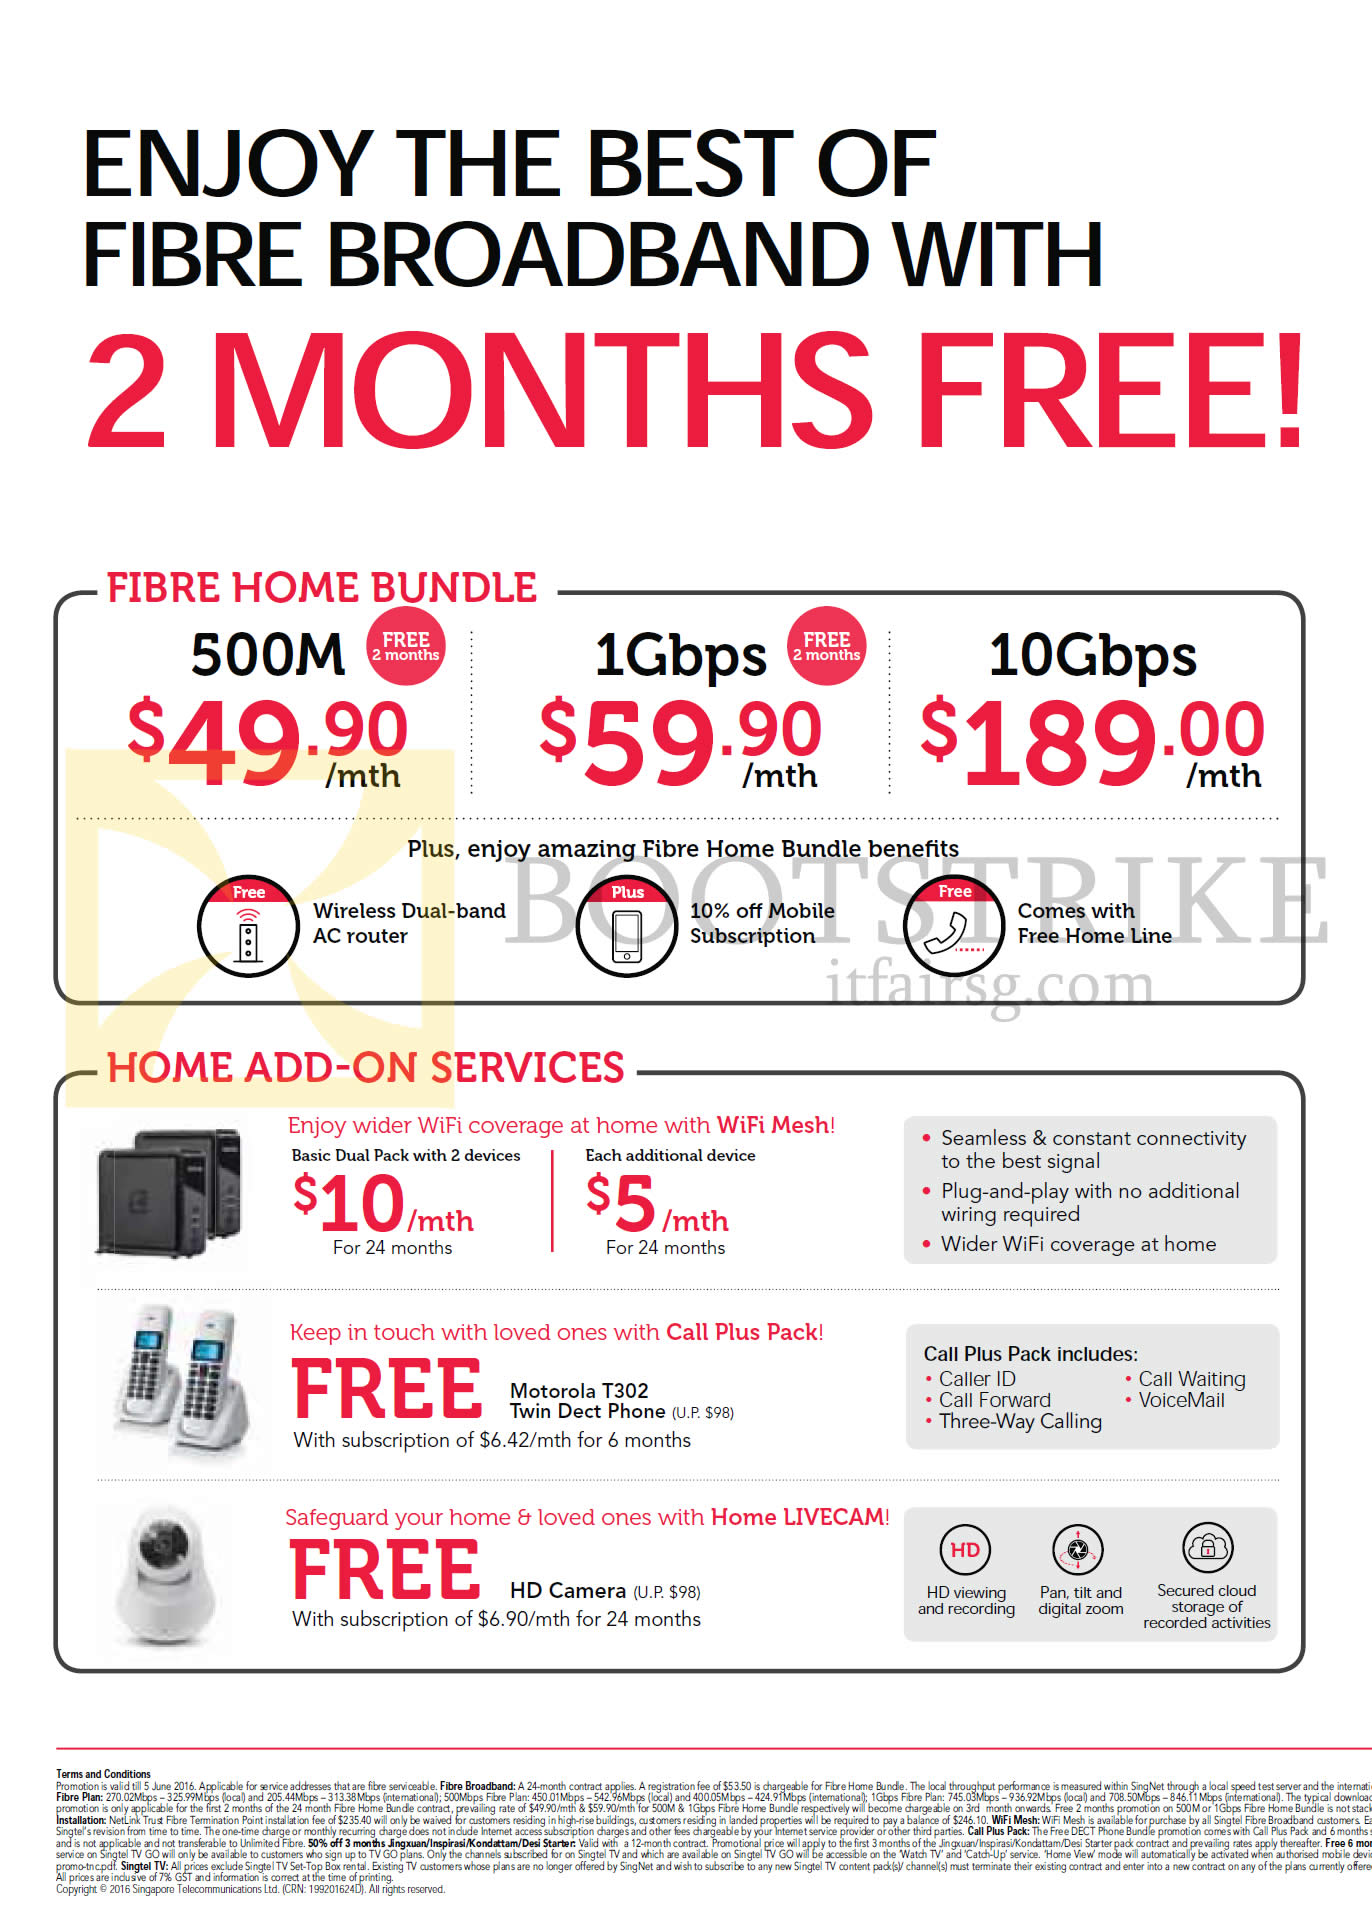 PC SHOW 2016 price list image brochure of Singtel Broadband Fibre Home Bundles, 49.90 500M, 59.90 1Gbps, 189.00 10Gbps. Home Add-on Services WiFi Mesh, Call Plus Pack, Home Livecam, Motorola T302 Phone, Camera